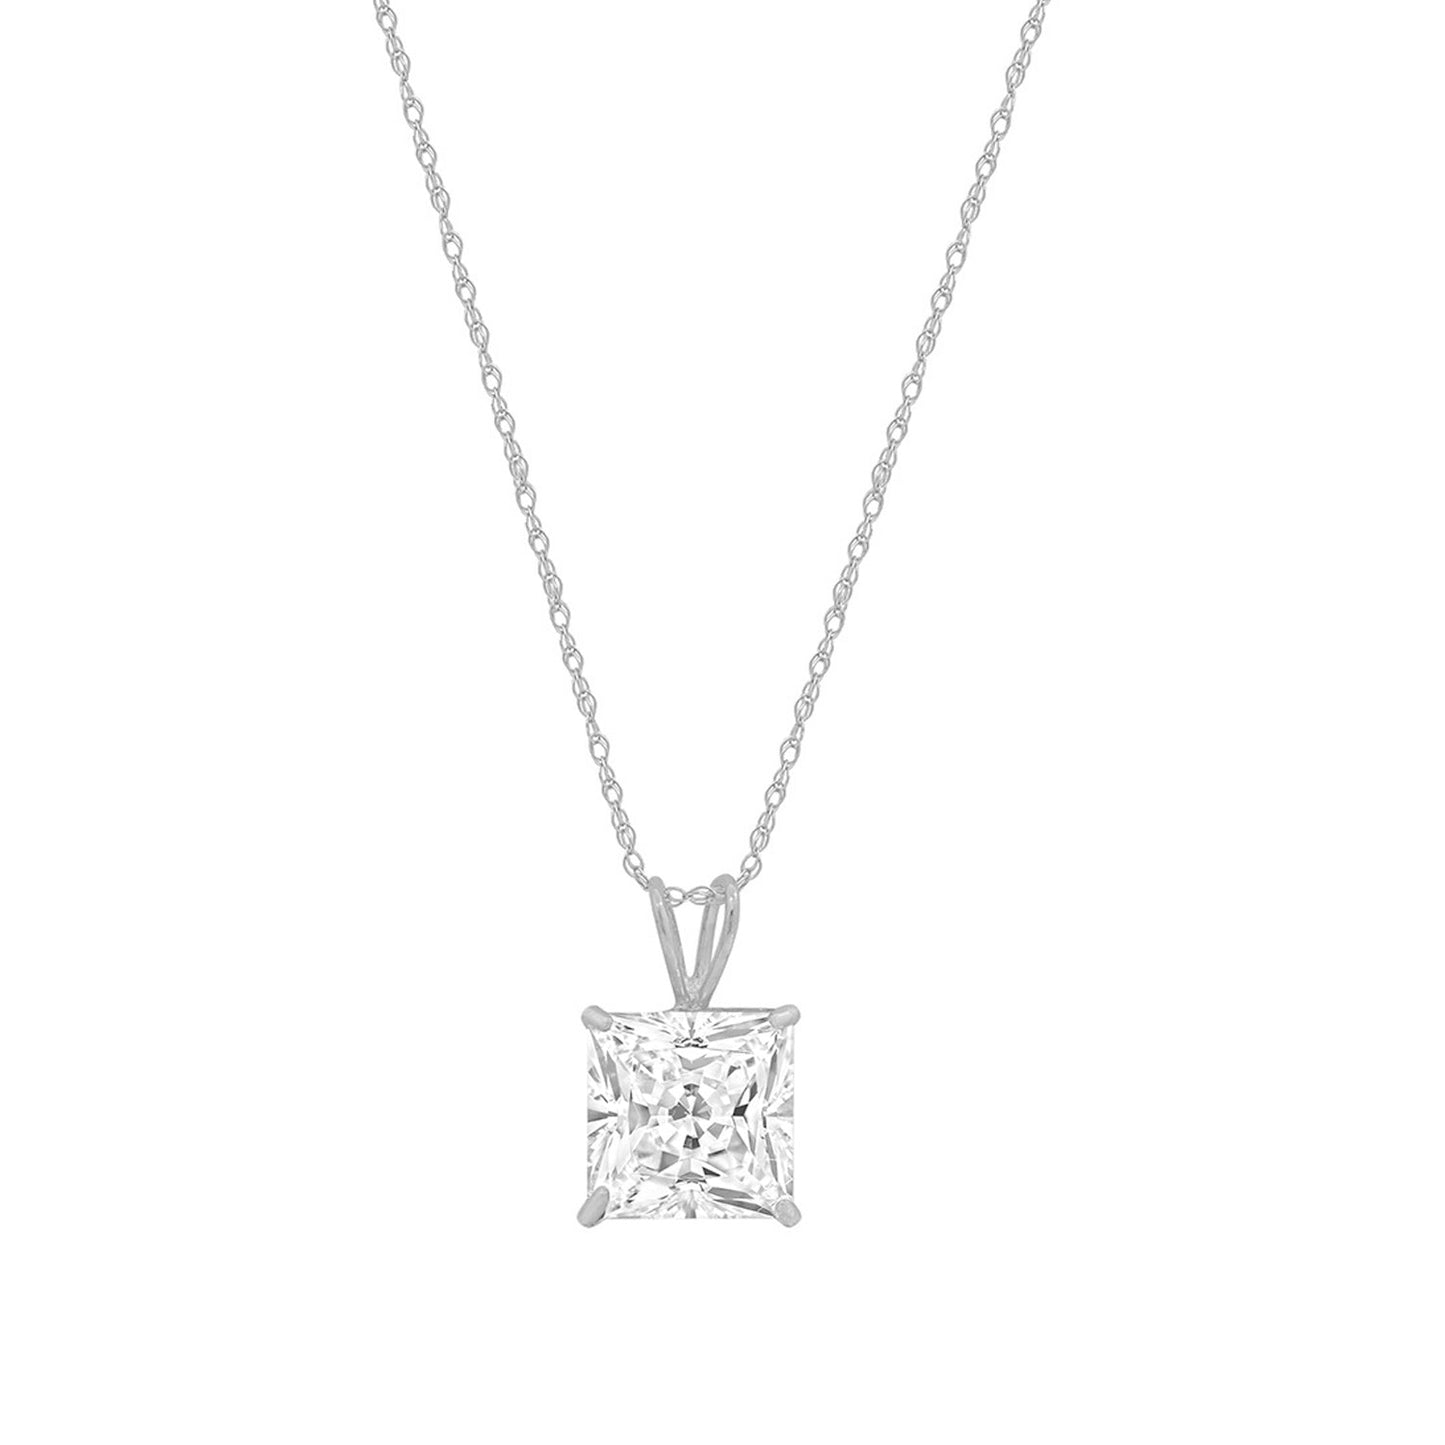 3 Cttw Princess Pendant with Chain